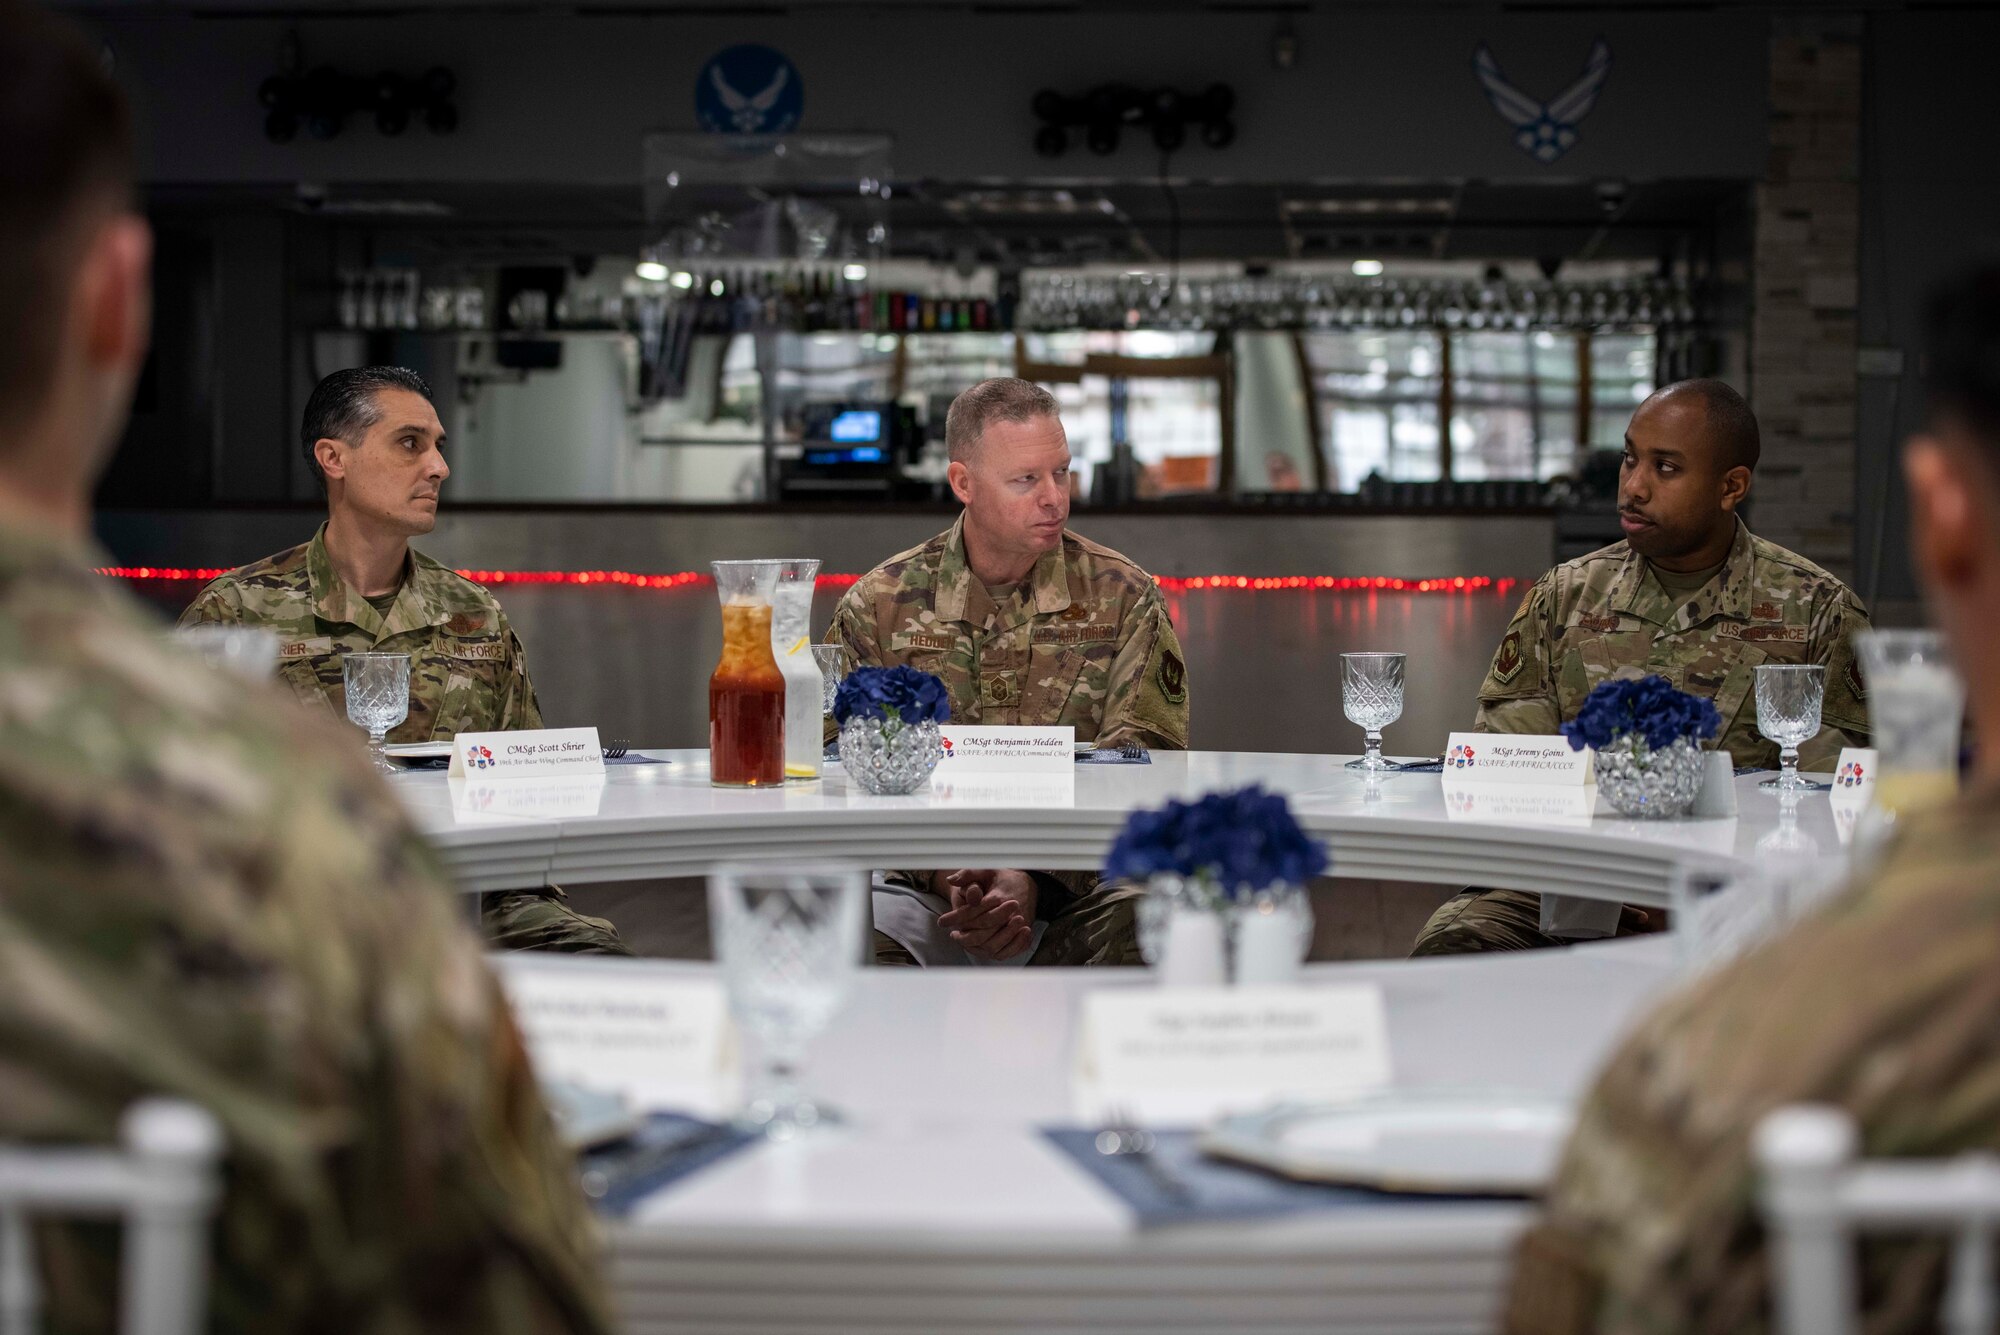 U.S. Air Force Chief Master Sgt. Benjamin Hedden, U.S. Air Forces in Europe-Air Forces Africa command chief, engages with Airmen during his visit to Incirlik Air Base, Turkey, Nov. 23, 2021. Hedden traveled to Incirlik AB to meet with Airmen assigned to the 39th Air Base Wing, learn about their capabilities and gain insight into the wing’s mission in defending NATO’s southern flank. (U.S. Air Force photo by Senior Airman Matthew Angulo)